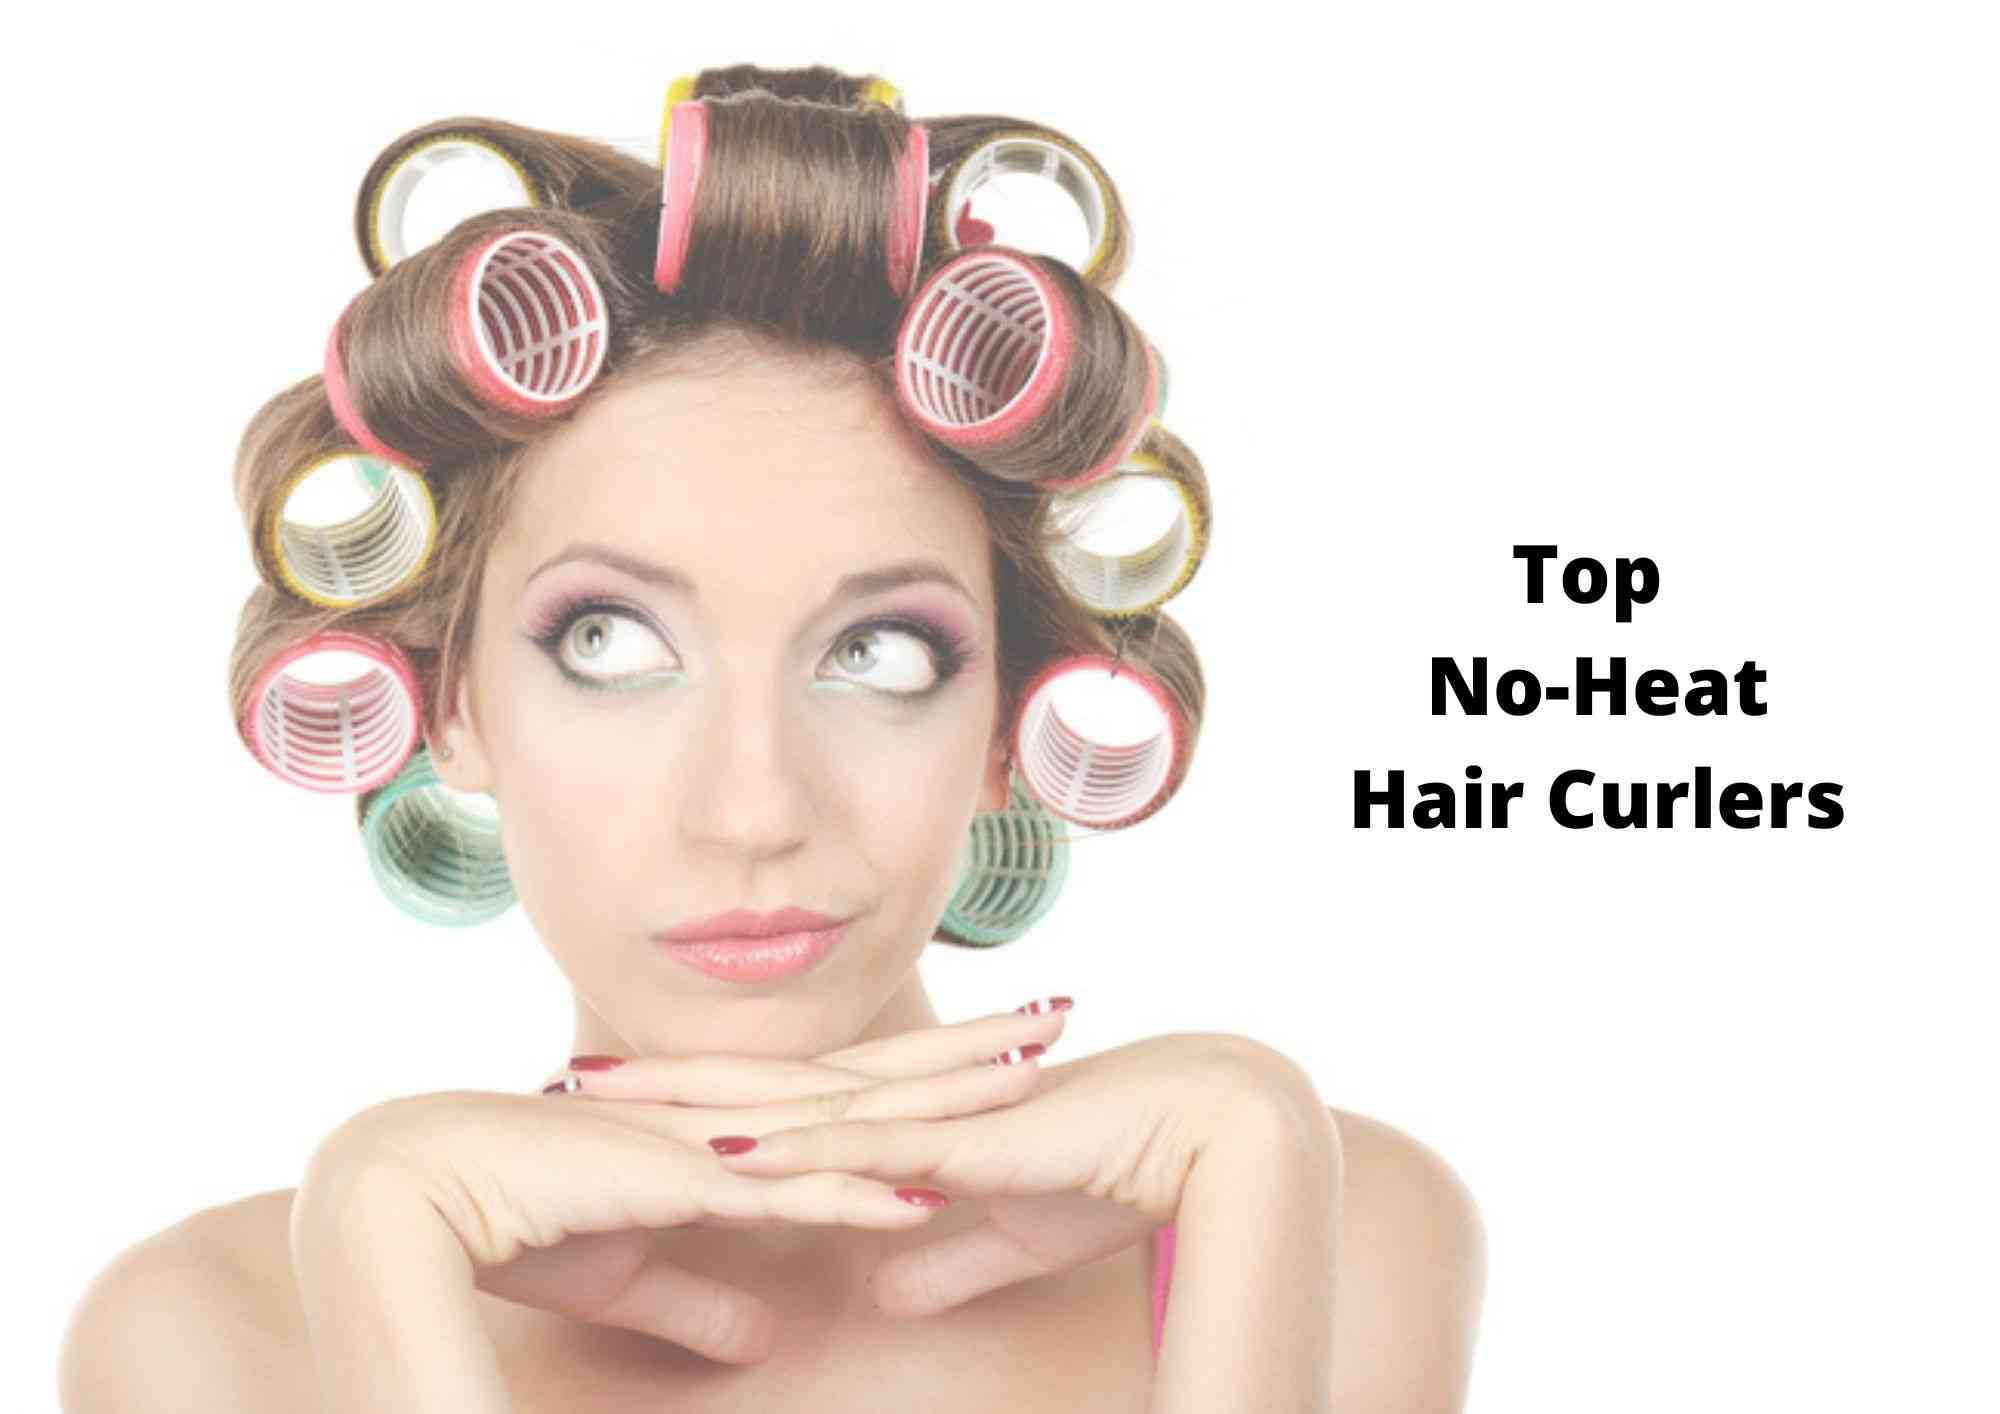 How to Use Hot Rollers